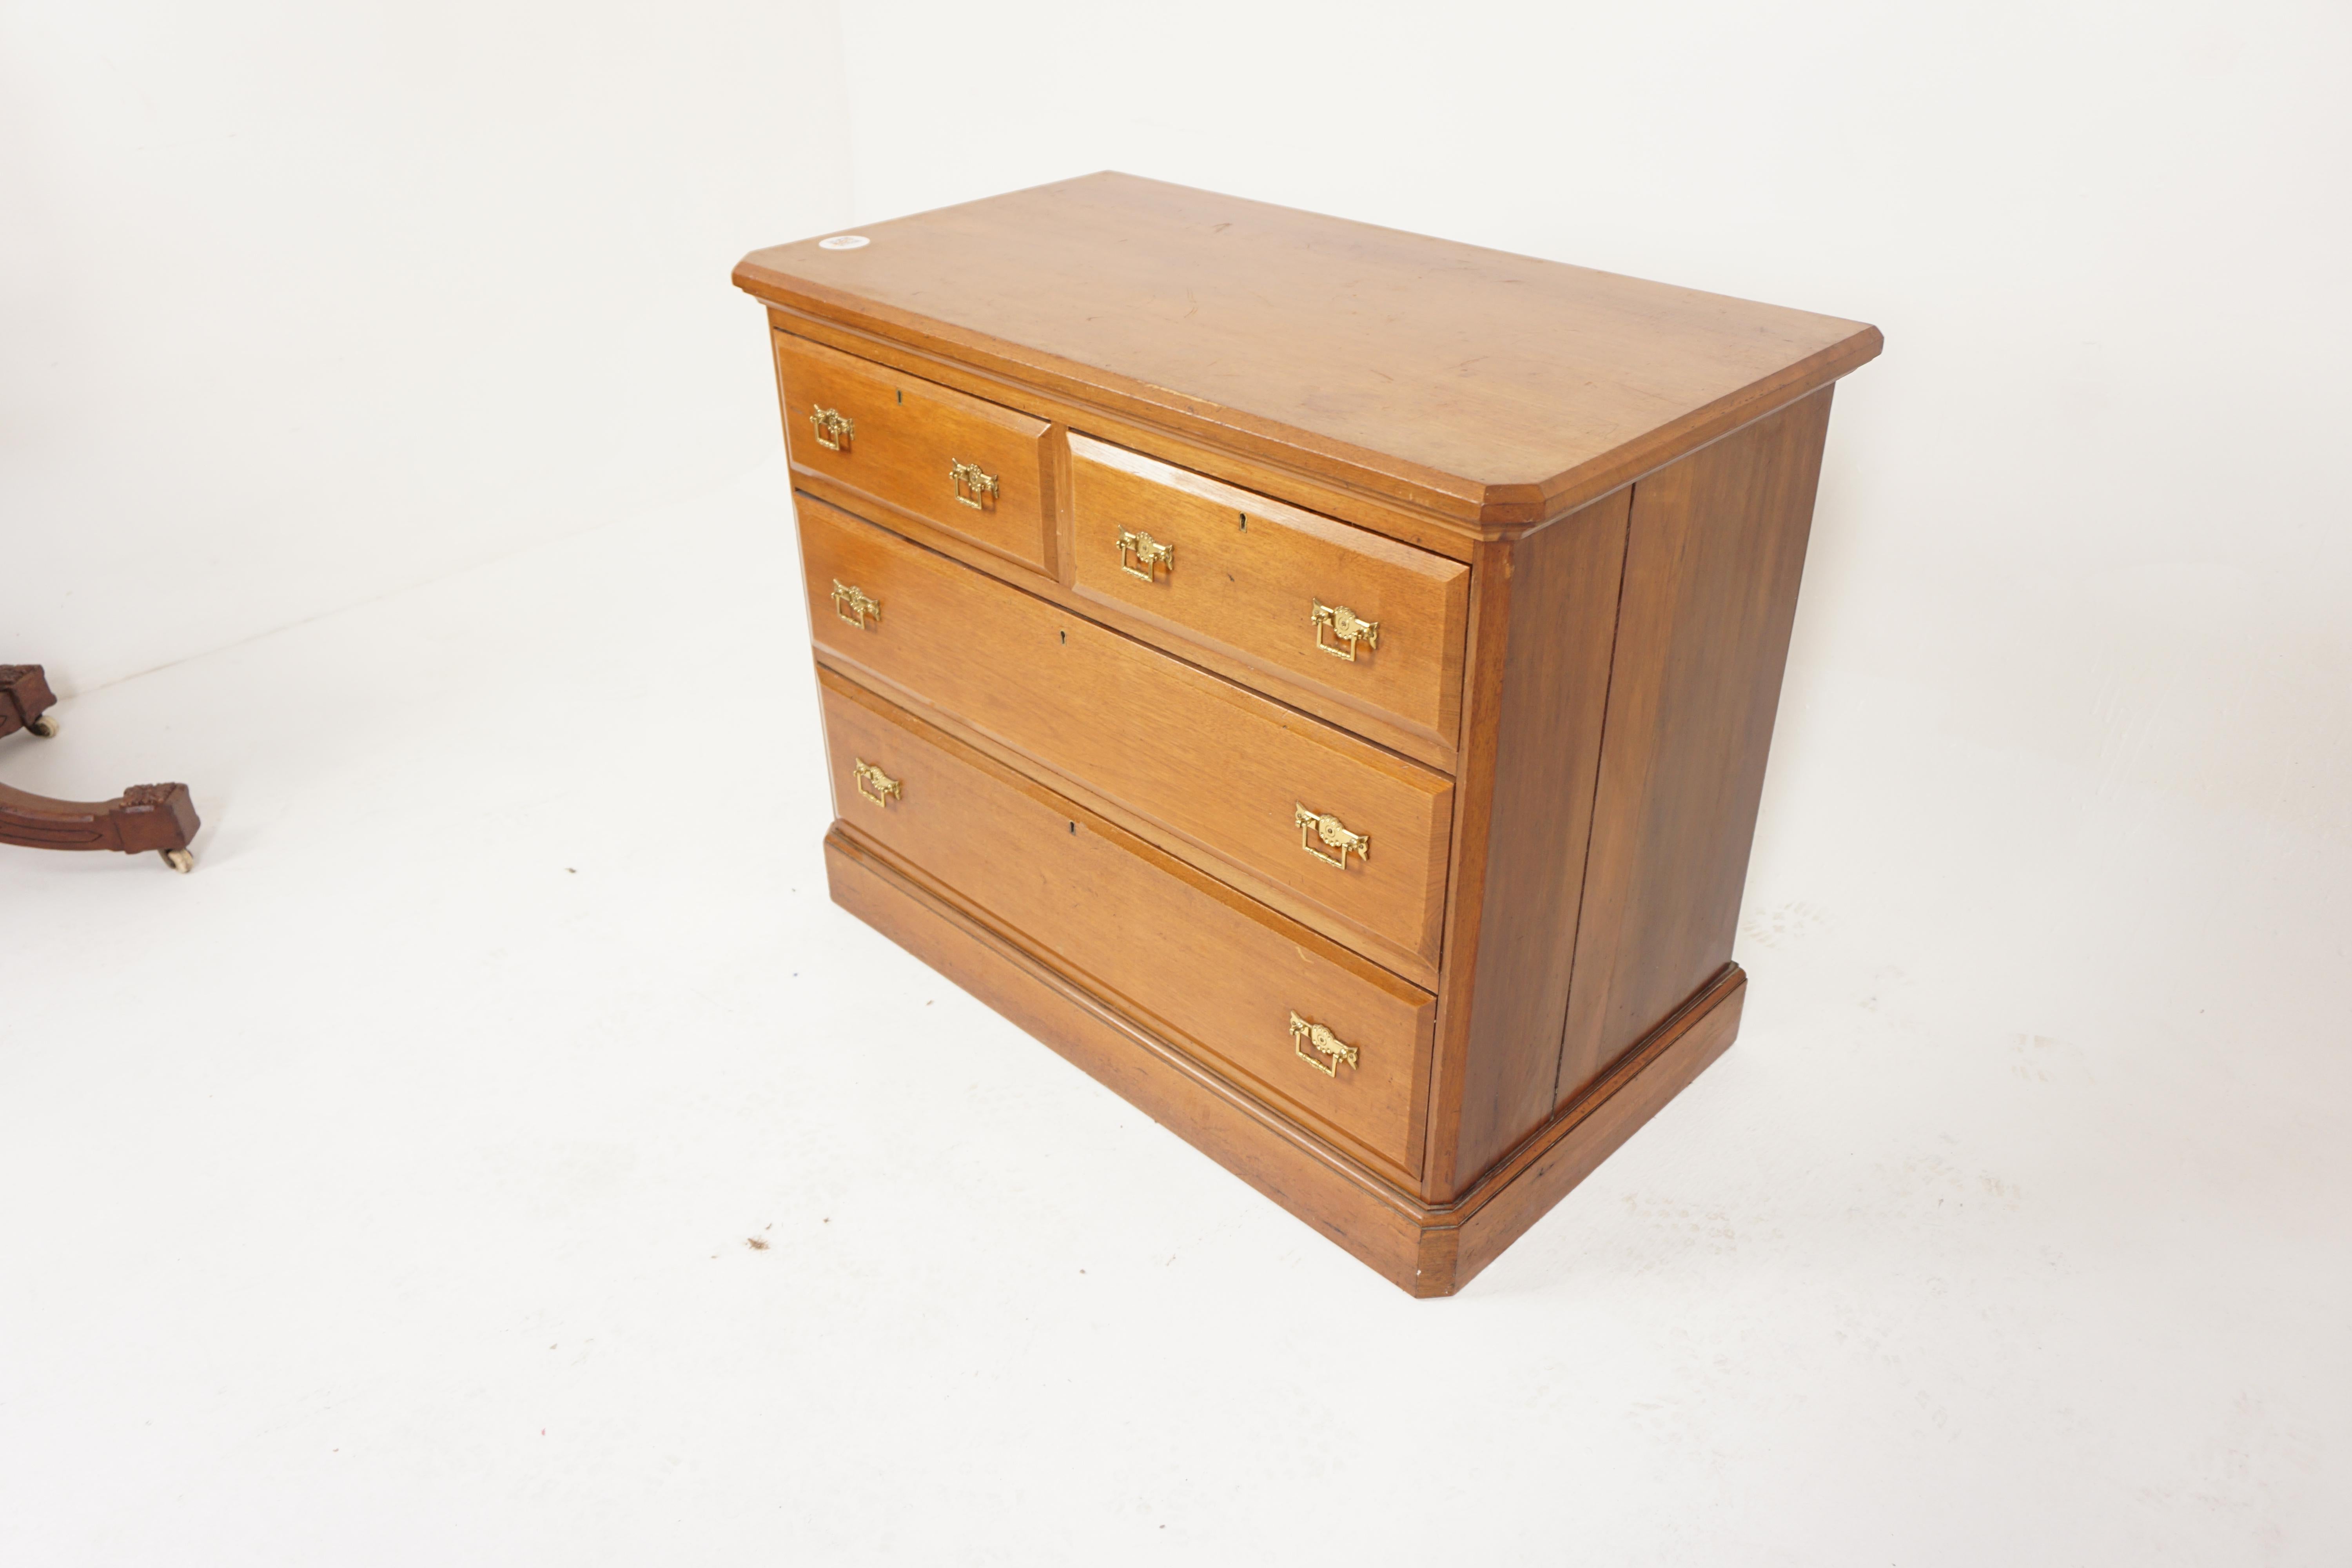 Ant. Victorian Arts and Crafts Ash Four drawer dresser chest, Scotland 1900, H596

Scotland 1900
Solid Ash
Original finish
Rectangular moulded top with canted ends
Comprising of two short and two long graduating dovetailed drawers
With